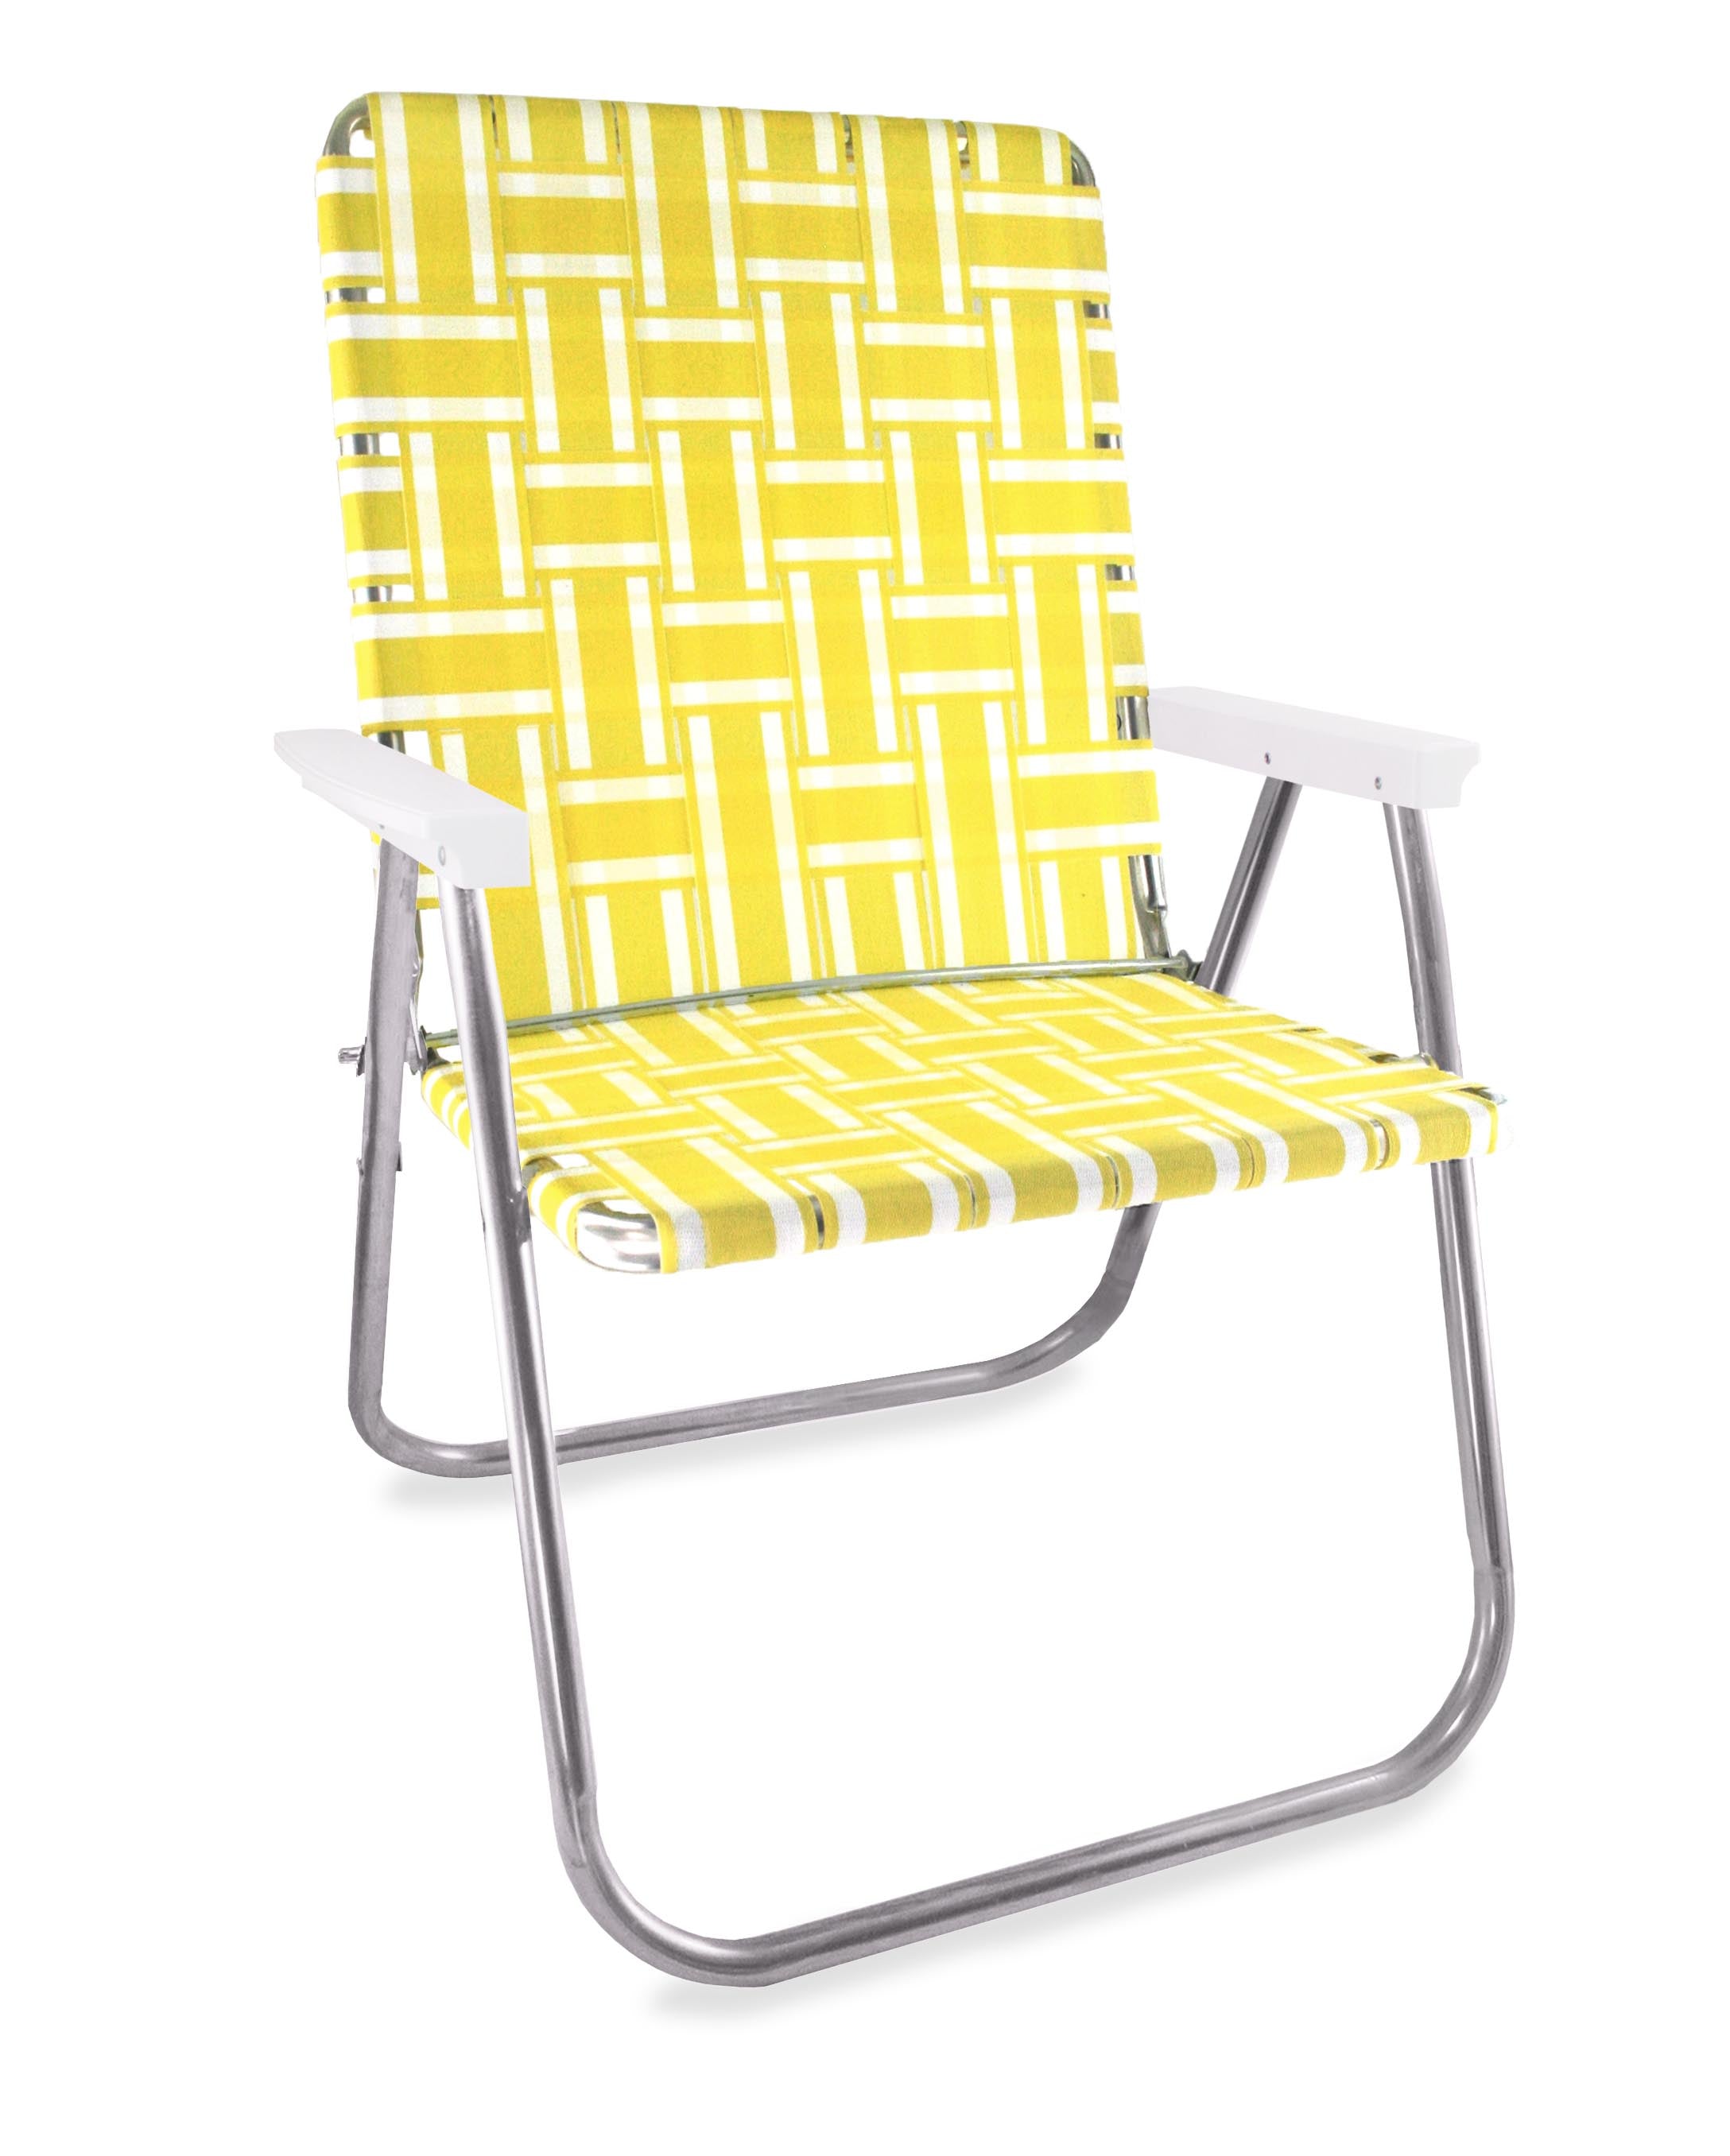 Lawn Chair USA Yellow and White Stripe Folding Aluminum Webbing Magnum Chair